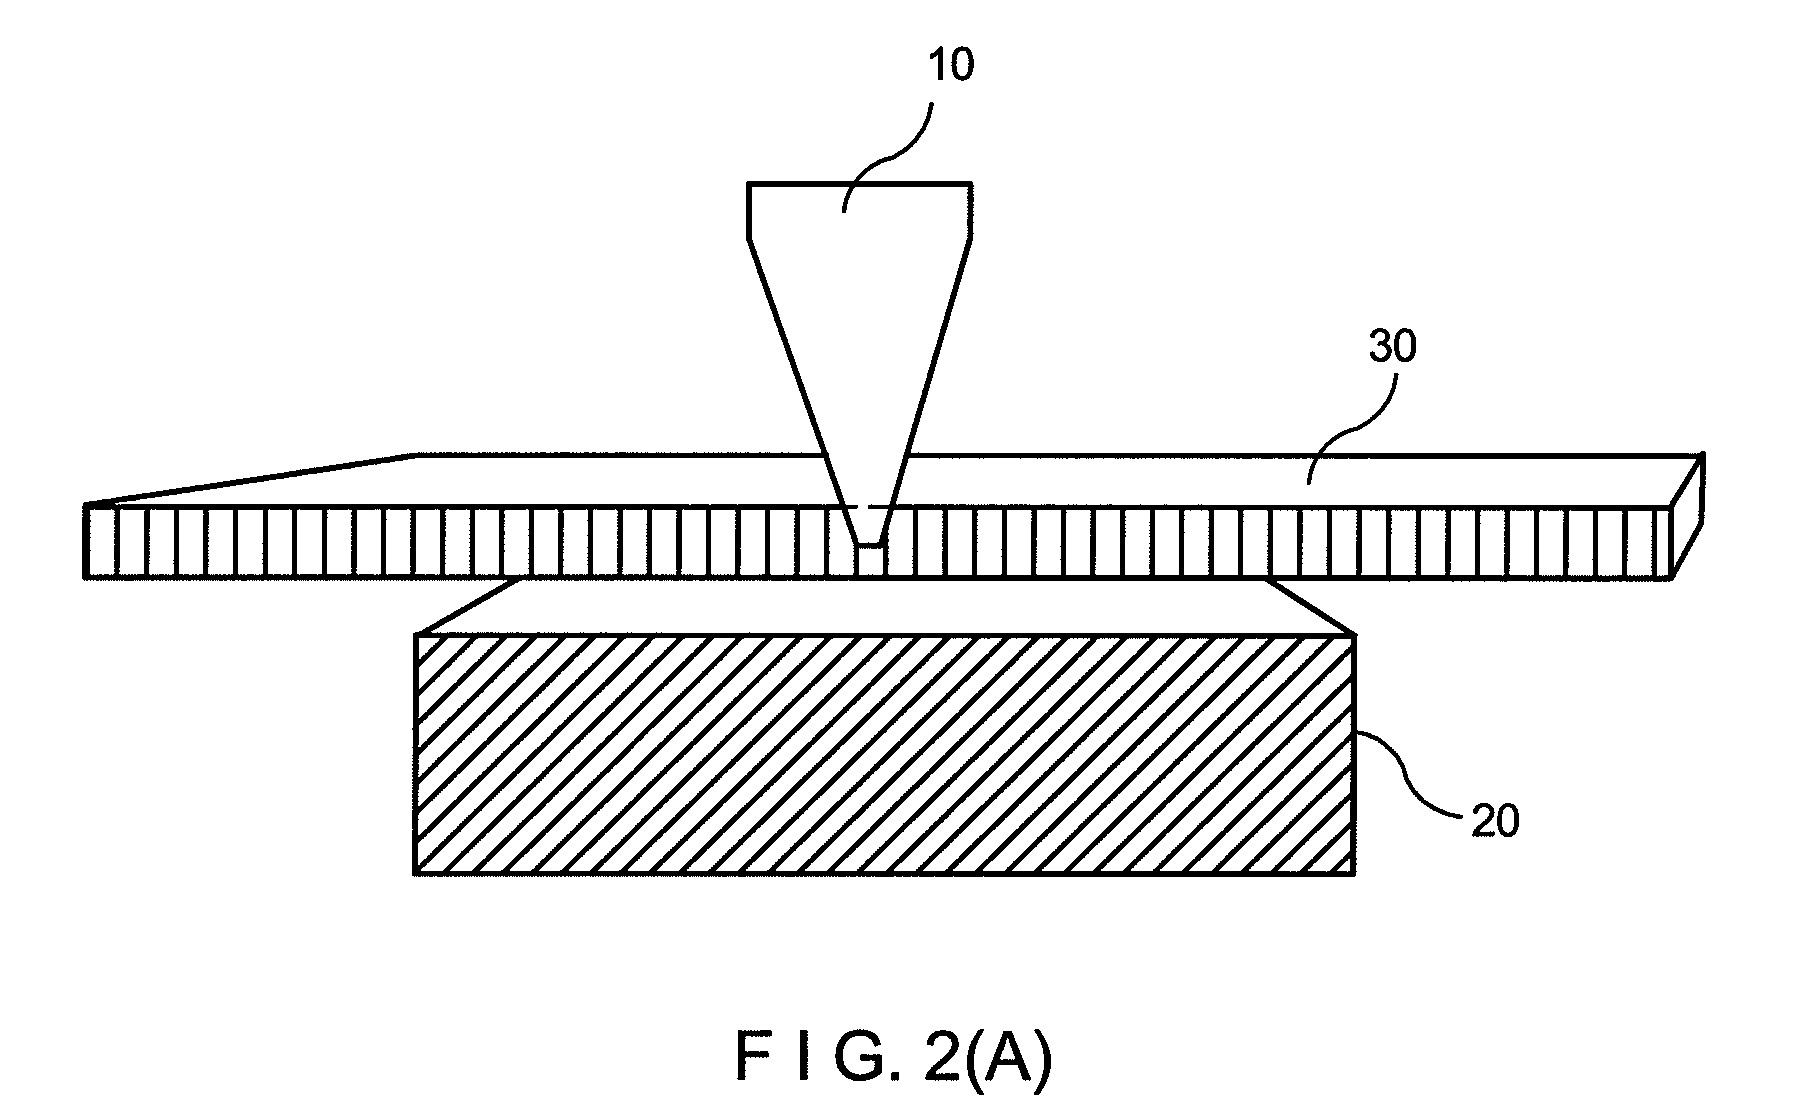 Formation of a fabric seam by ultrasonic gap welding of a flat woven fabric